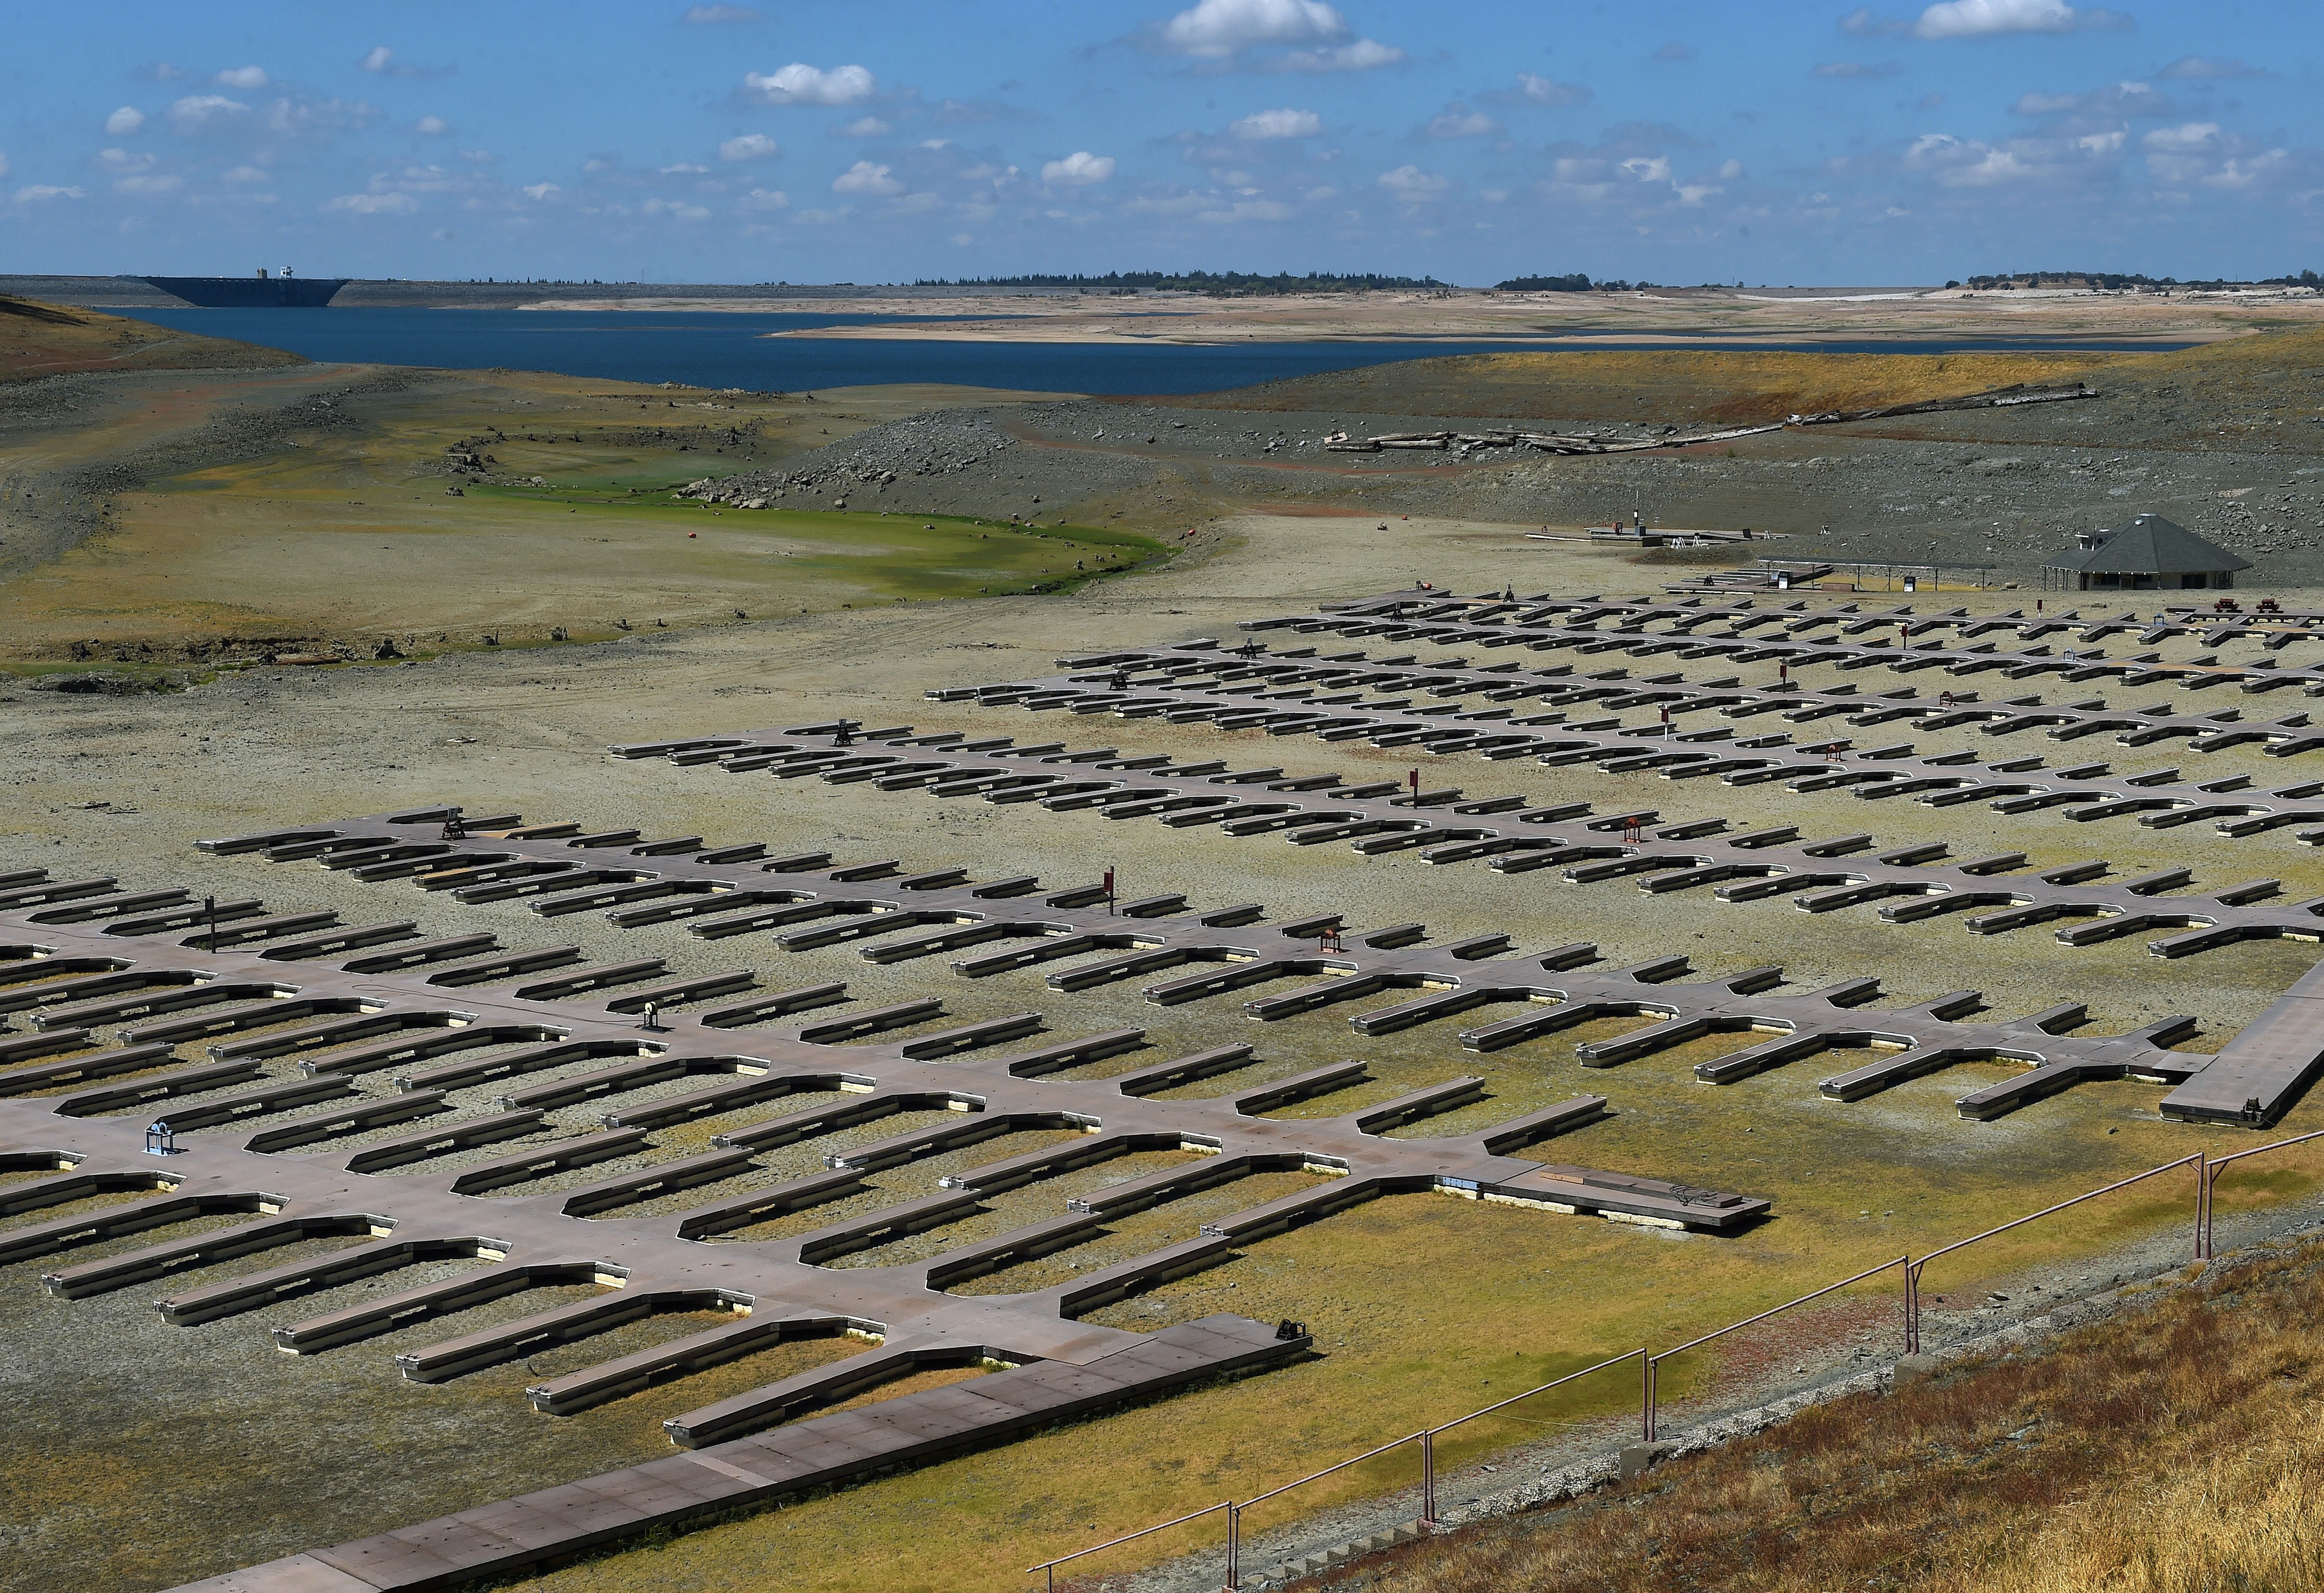 Boat docks sit empty on dry land, as Folsom Lake reservoir near Sacramento stands at only 18 percent capacity, as severe drought continues in California on Sept. 17, 2015. (Mark Ralston—AFP/Getty Images)